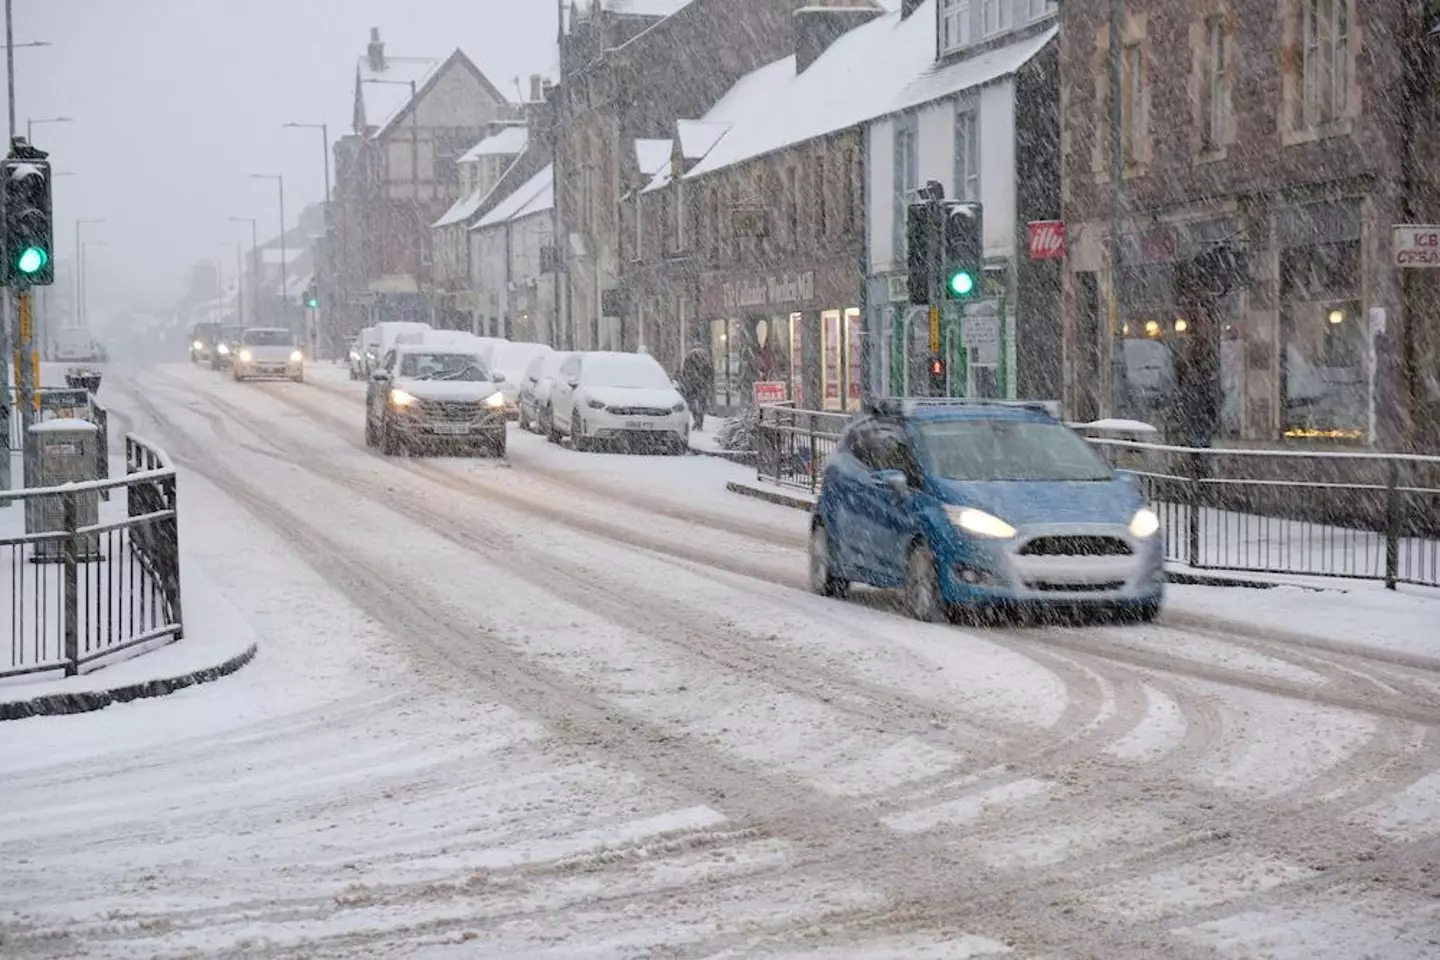 Weather experts predict next week will see heavy snowfall in parts of the UK.